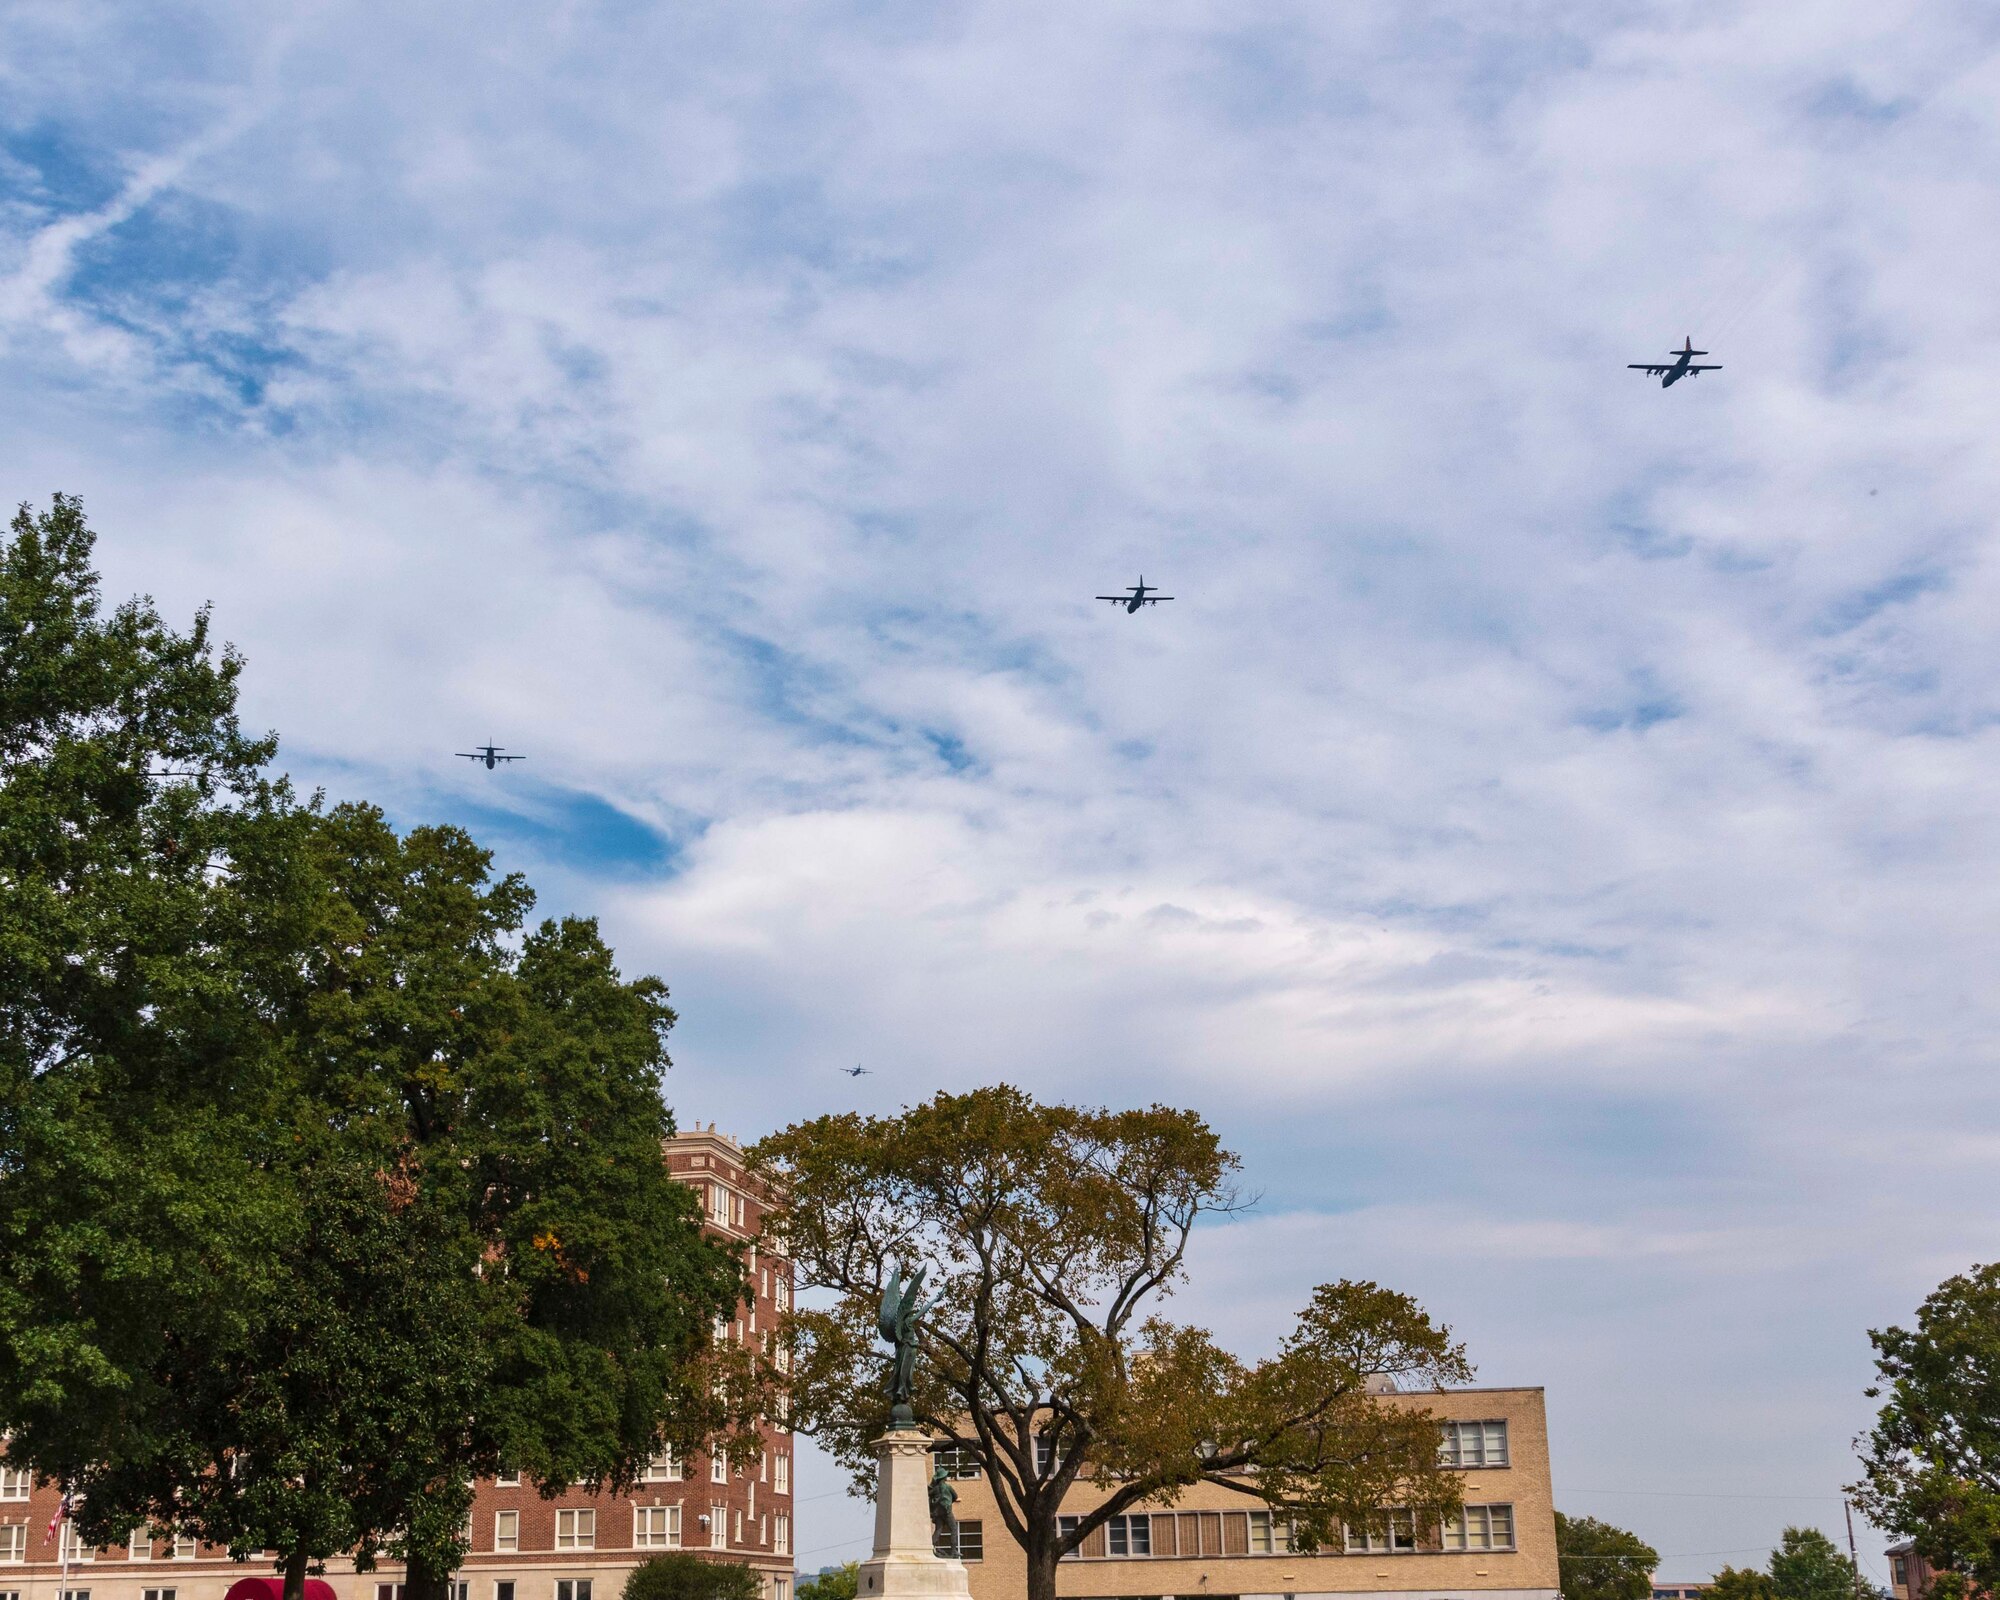 U.S. Air Force C-130s from Little Rock Air Force Base fly over Arkansas, Oct. 8, 2020, in celebration of the 65th anniversary of the base's first open house. The aerial review honored the local community for their unwavering support since 1955. (U.S. Air Force photo by Maj. Ashley Walker)